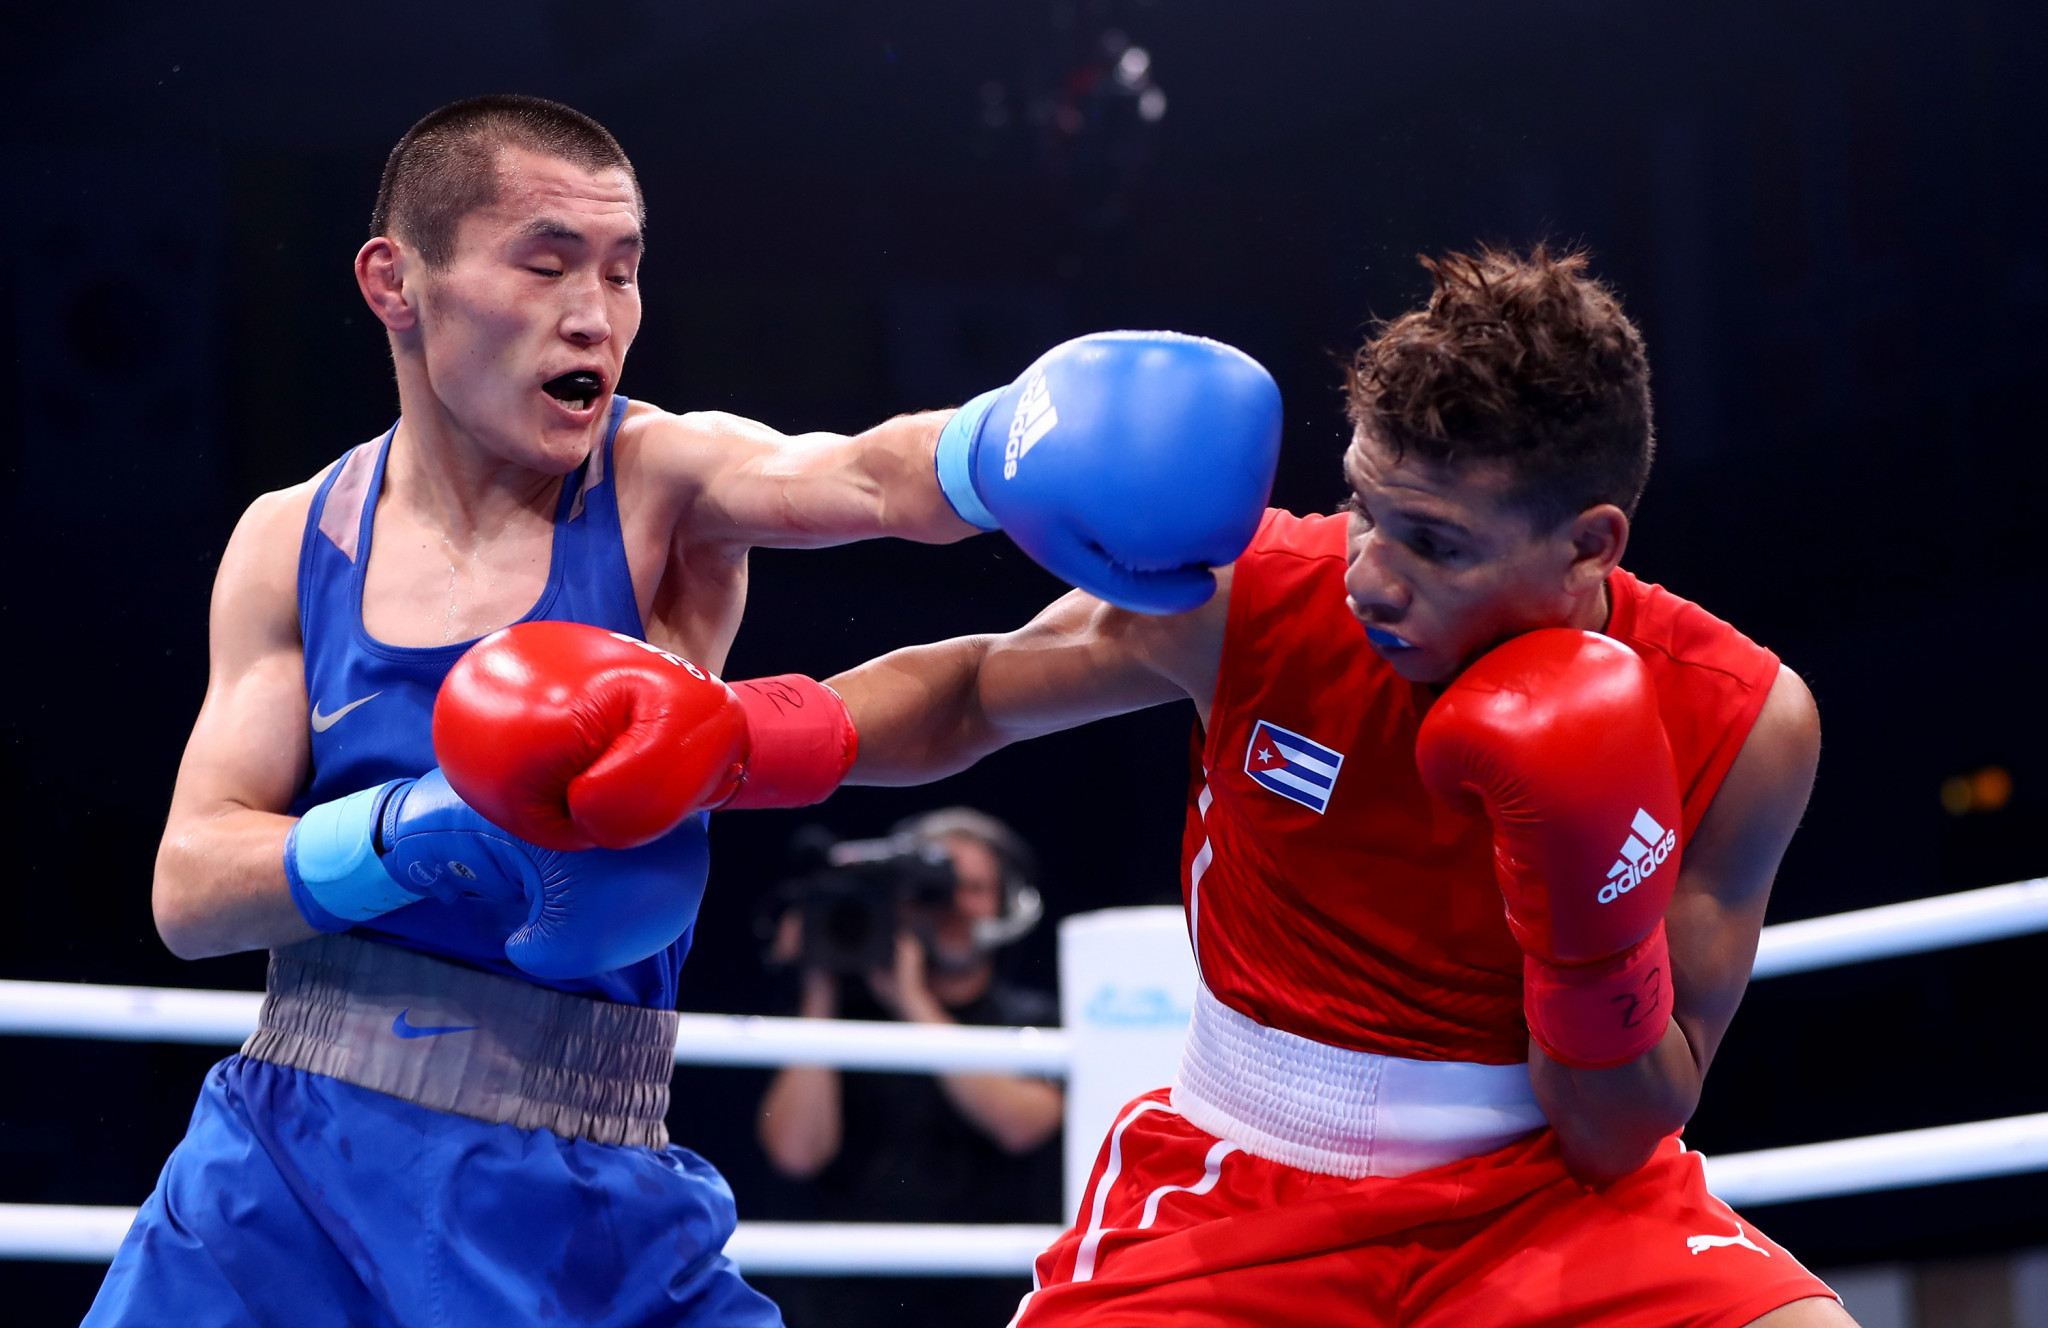 Russian World Championship bronze medallist boxer handed two-year doping ban